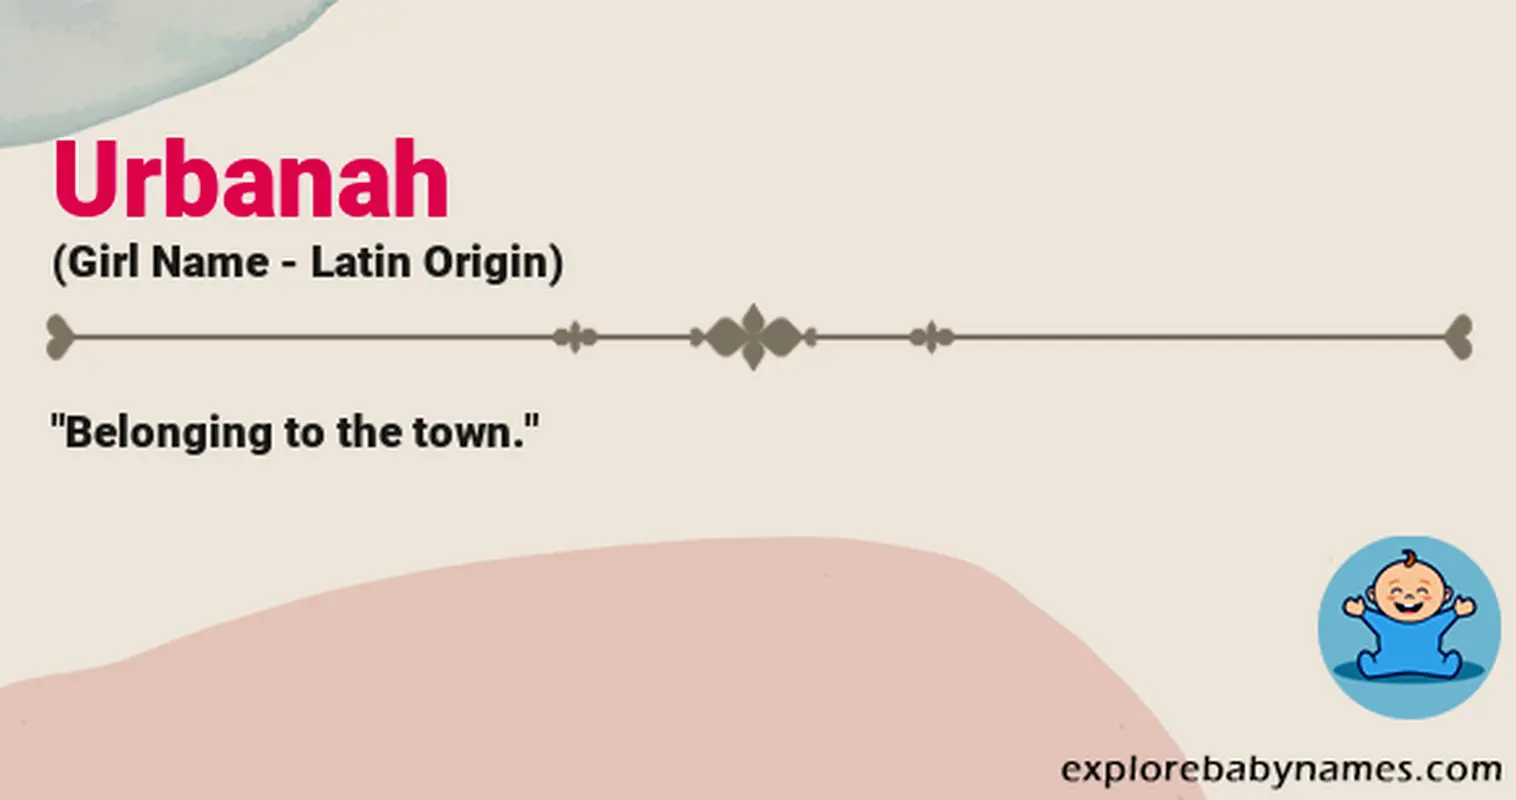 Meaning of Urbanah